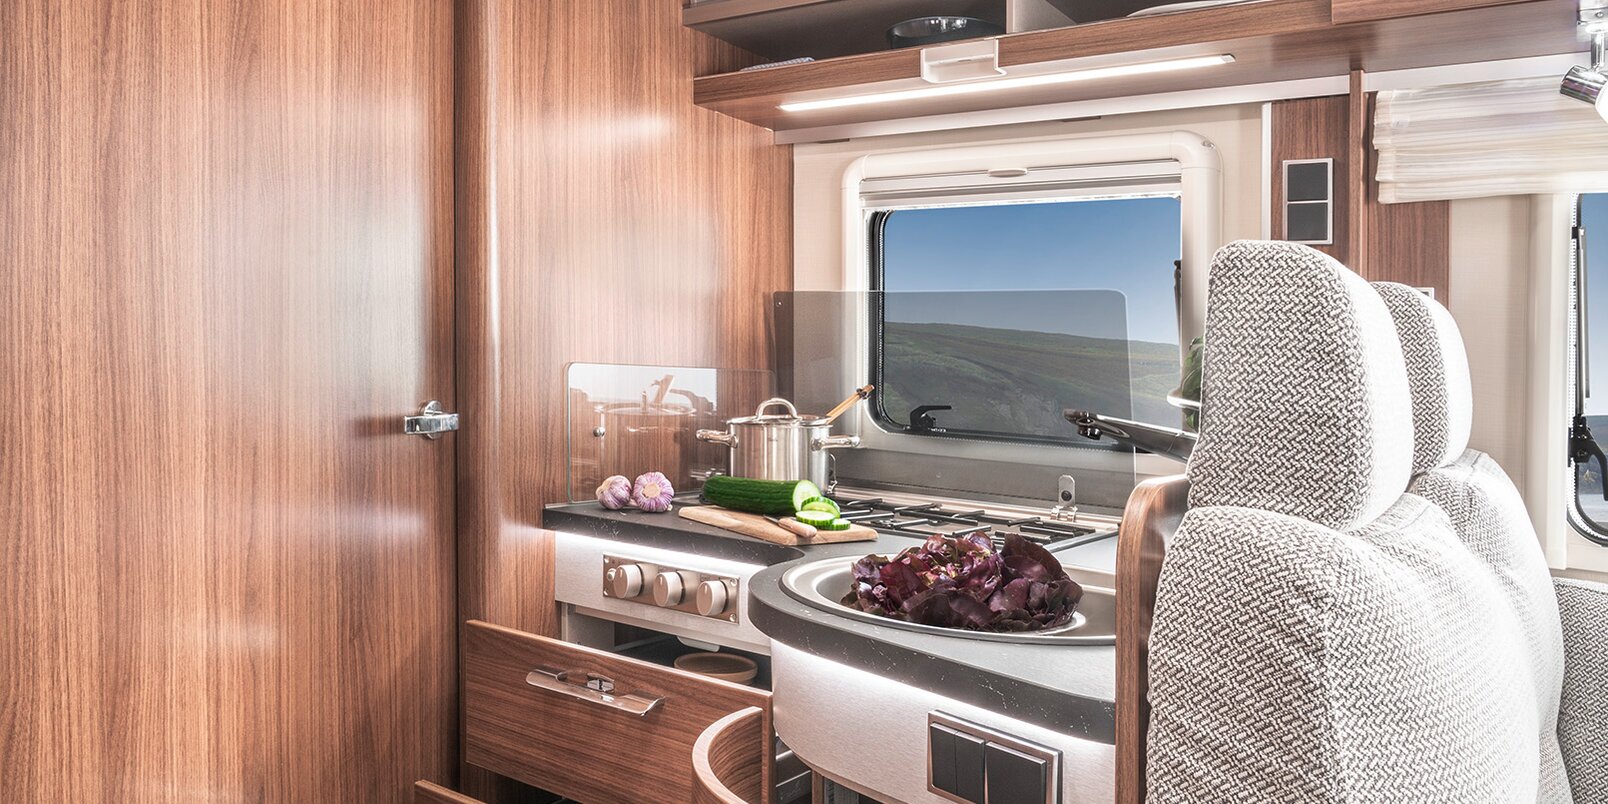 Open drawers / overhead storage cupboards in the kitchen full of kitchen utensils, rear wall cushions with headrests in the HYMER B-MC